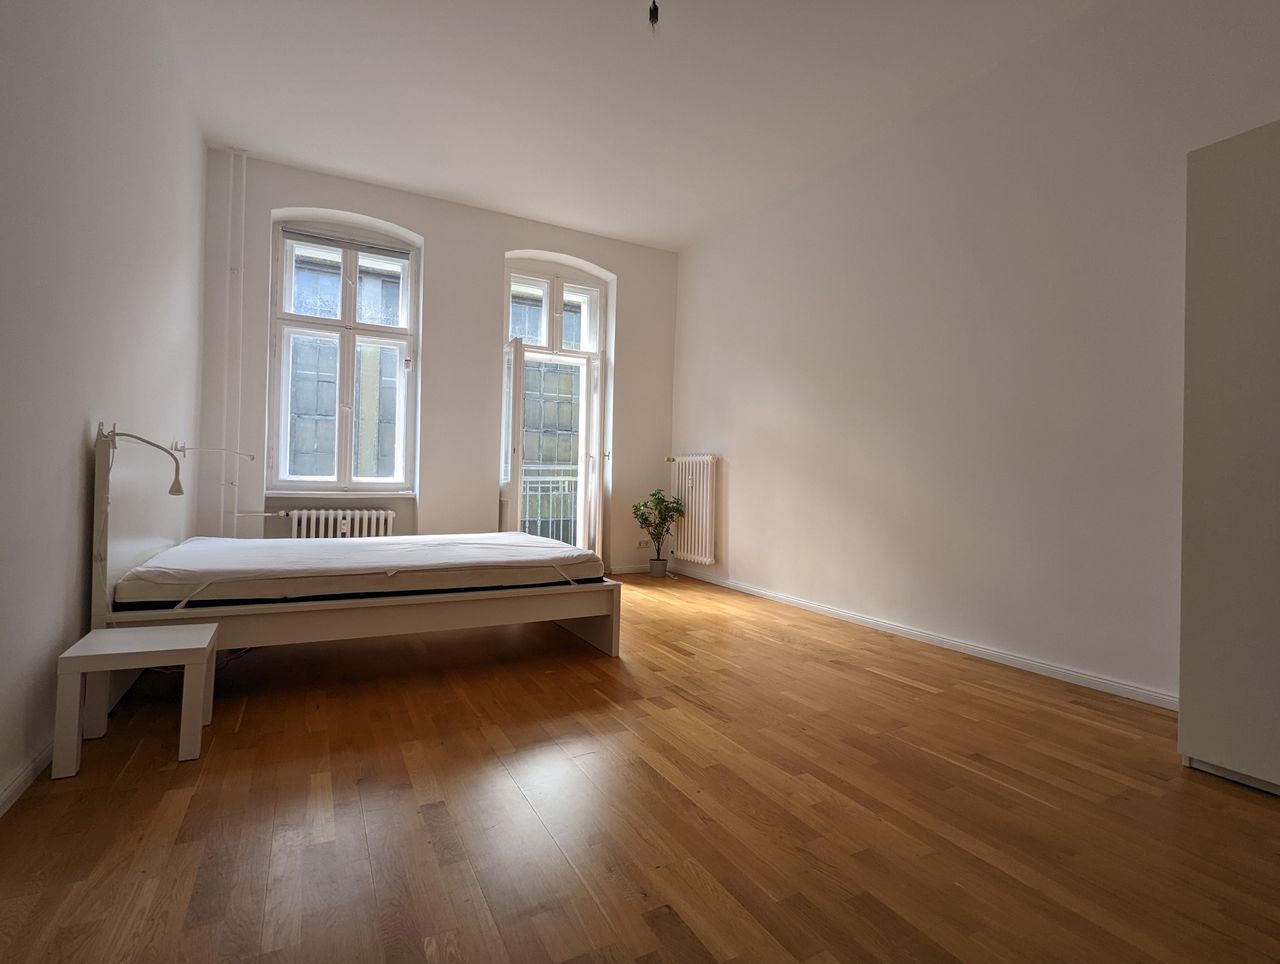 Quiet and spacious apartment in the center of Berlin